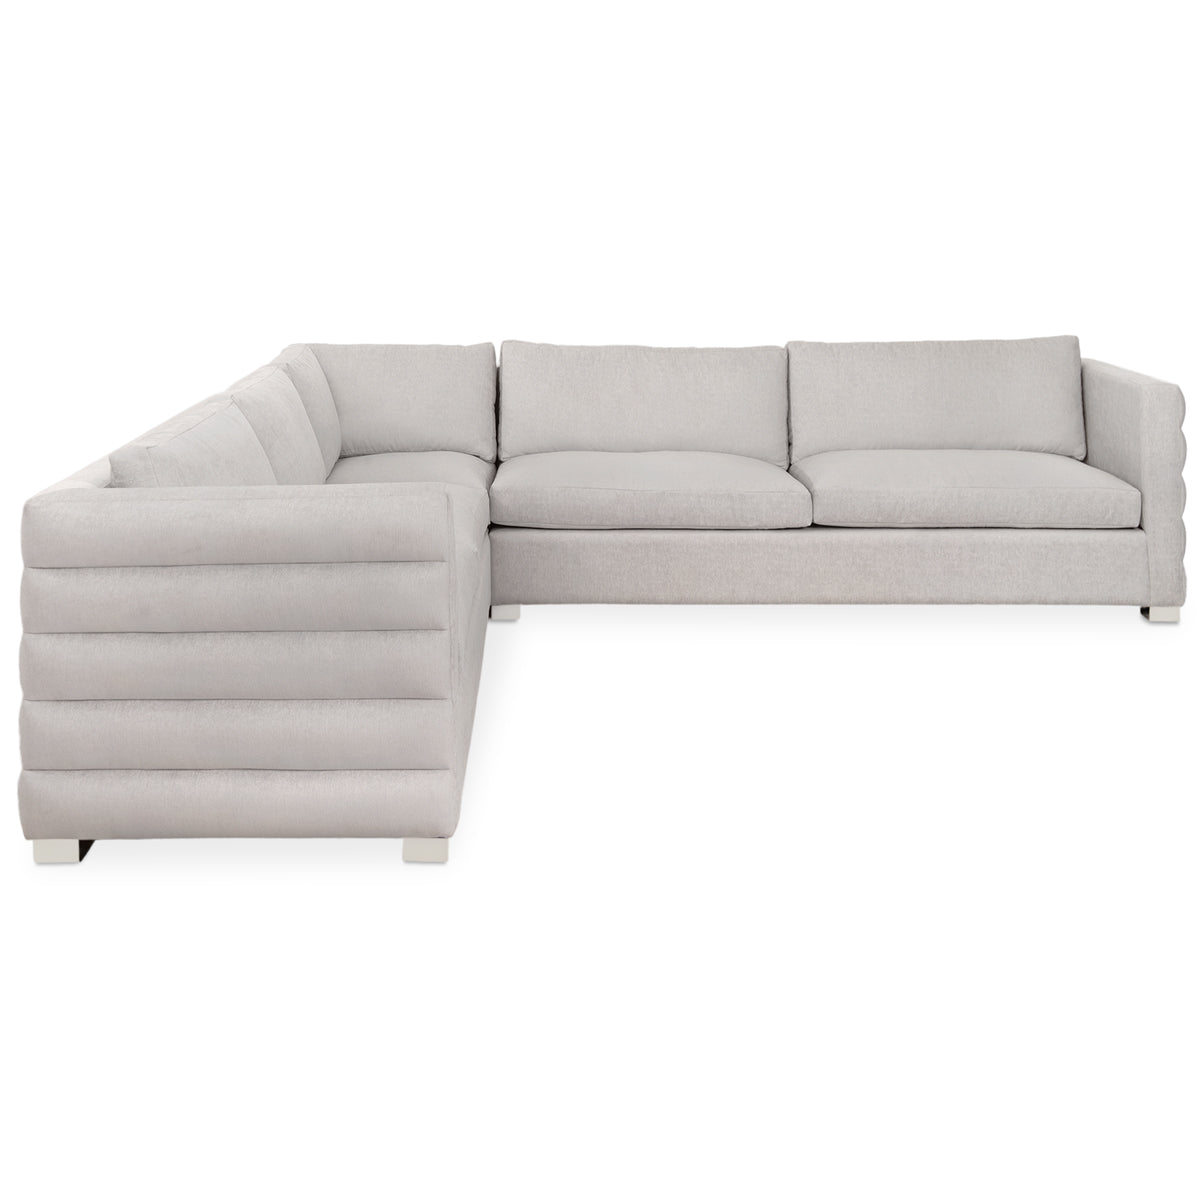 Shoreclub Sectional with Channel Tufted Arms